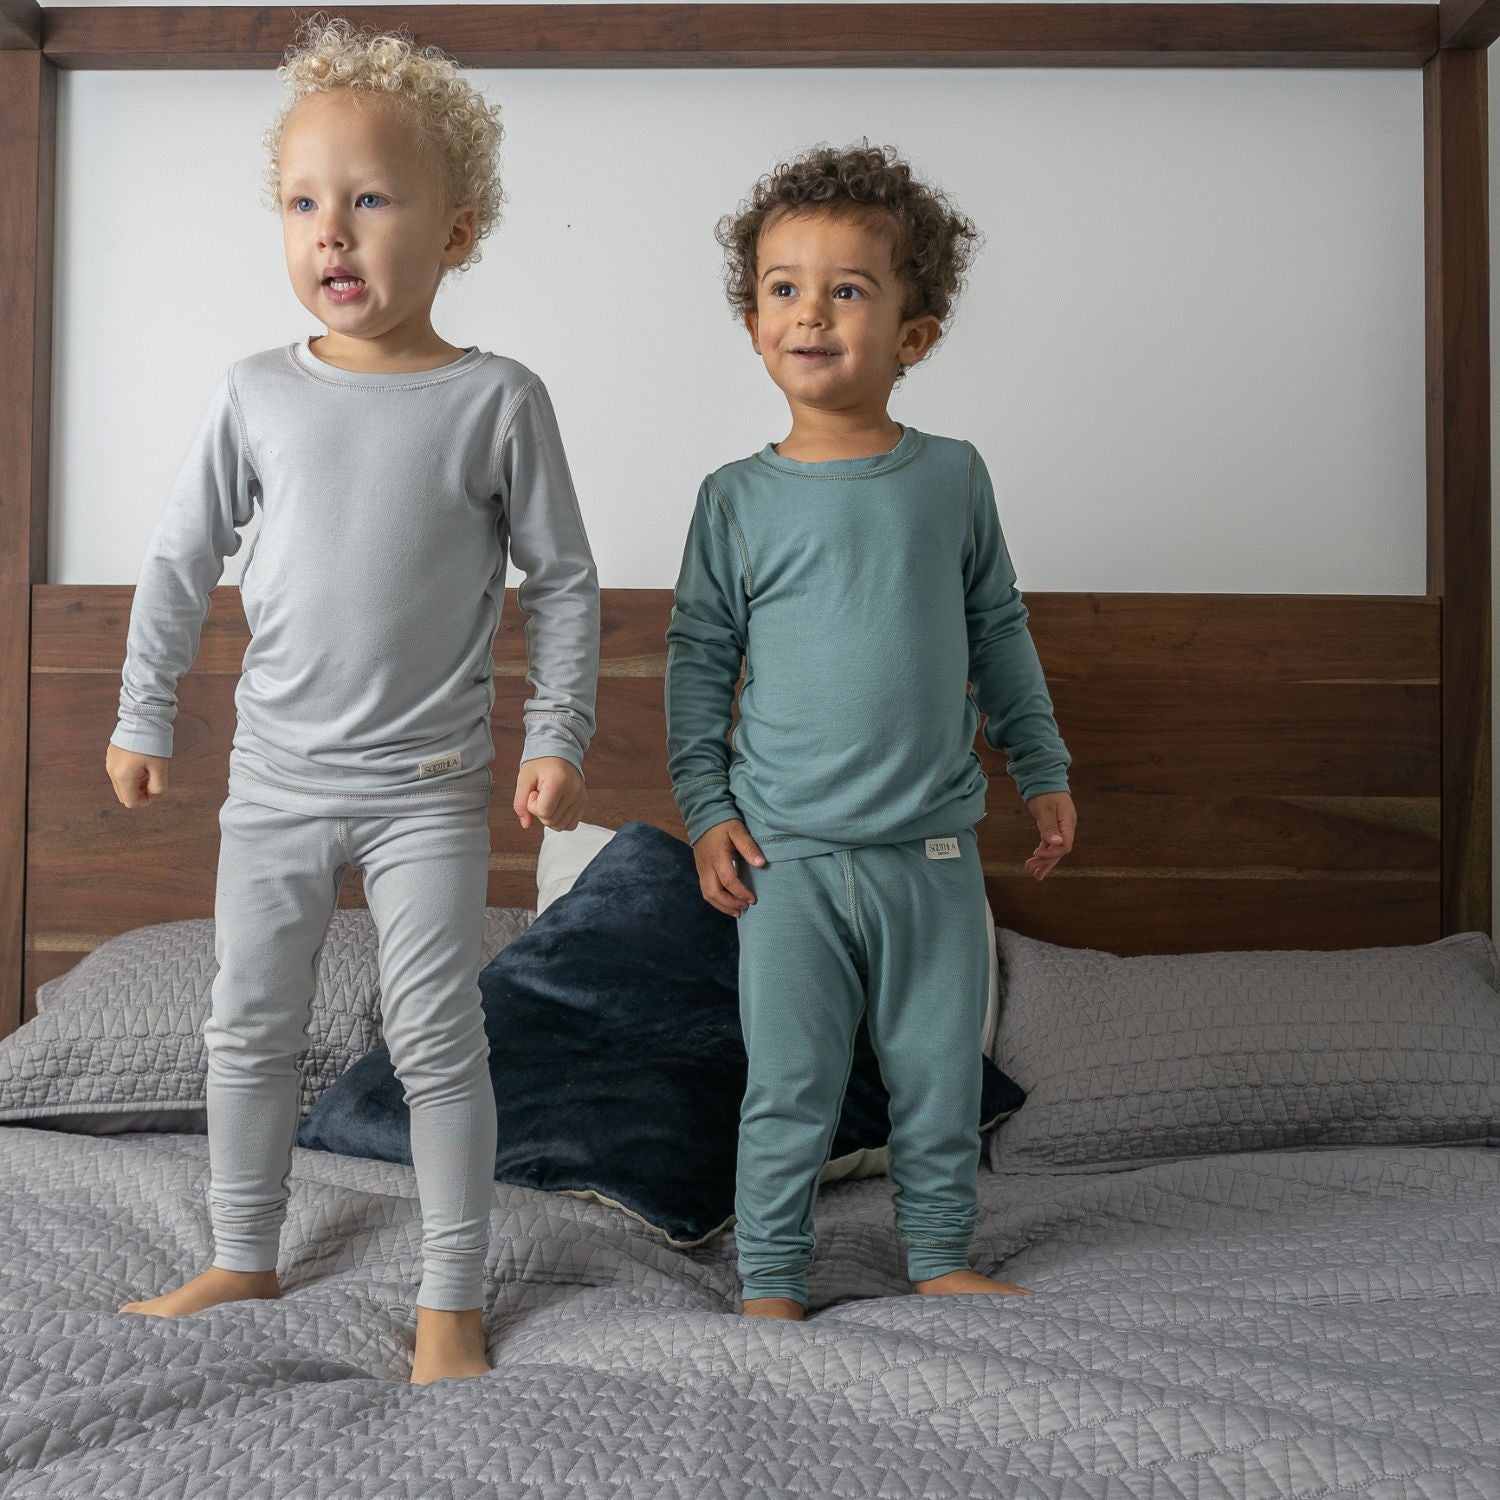 Boys Wearing Allergy-friendly Clothing From SOOTHLA Standing On Bed